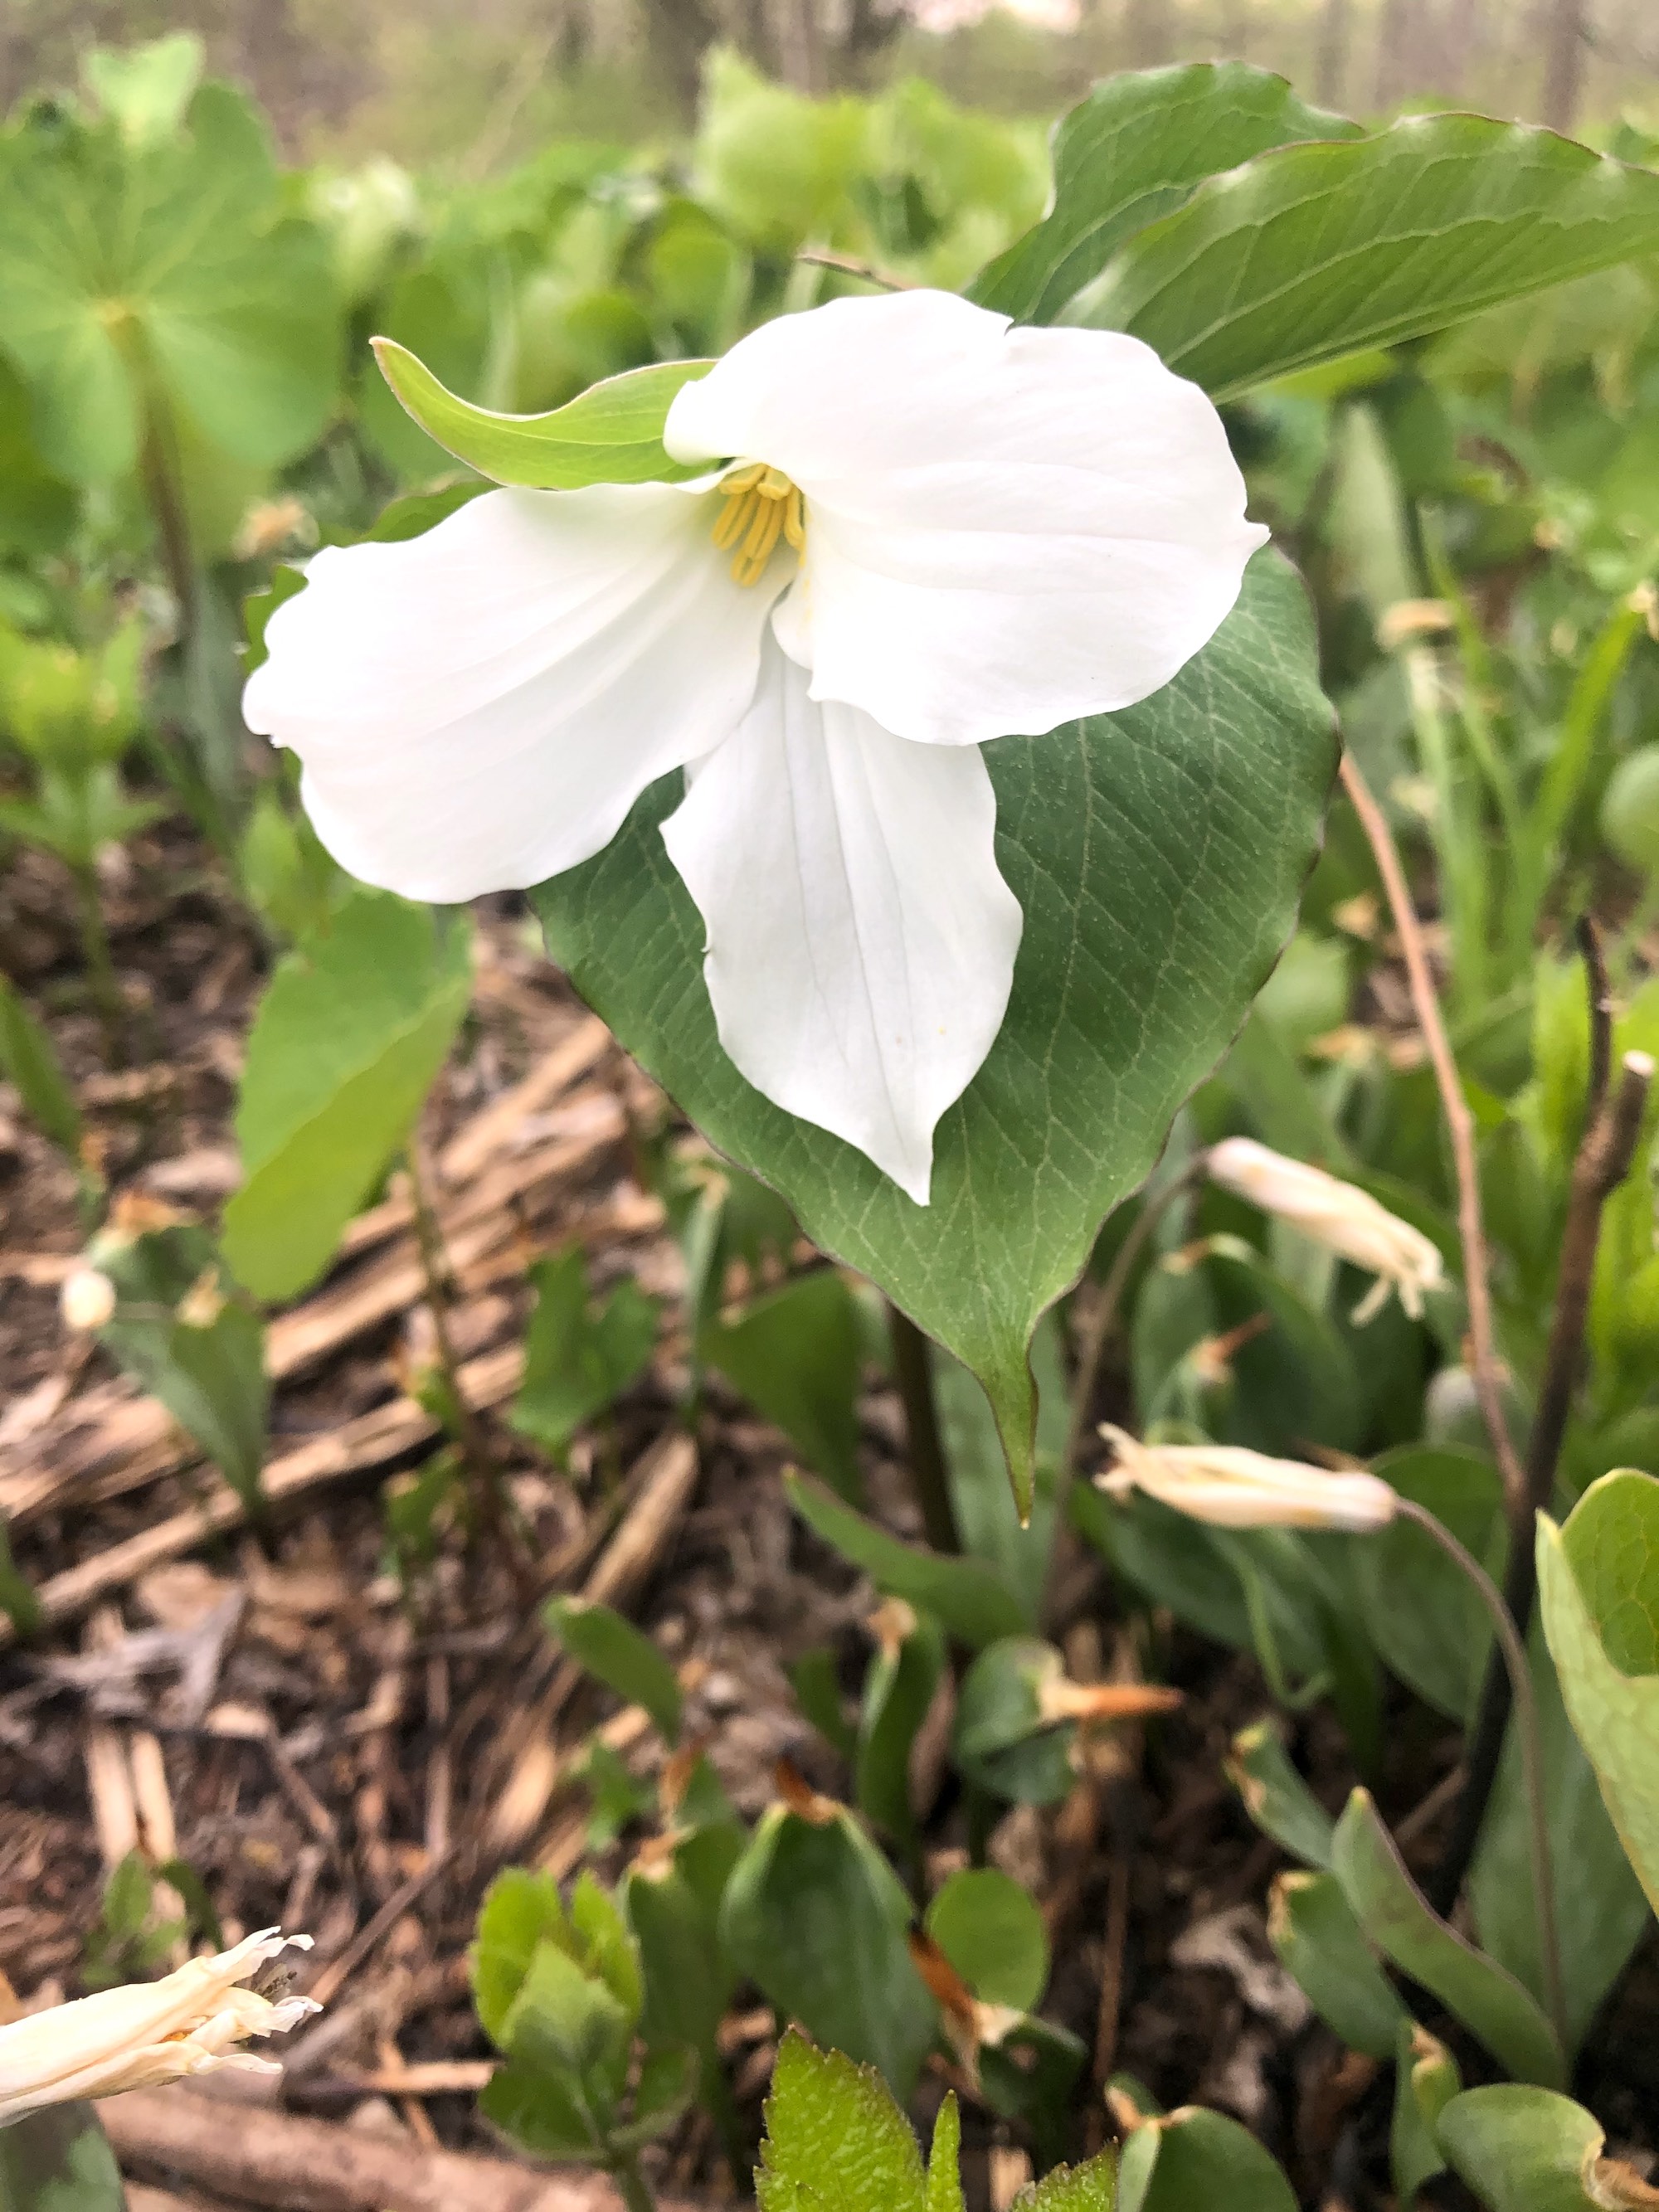 Great White Trillium near Council Ring in Oak Savanna in Madison, Wisconsin on April 30, 2021.